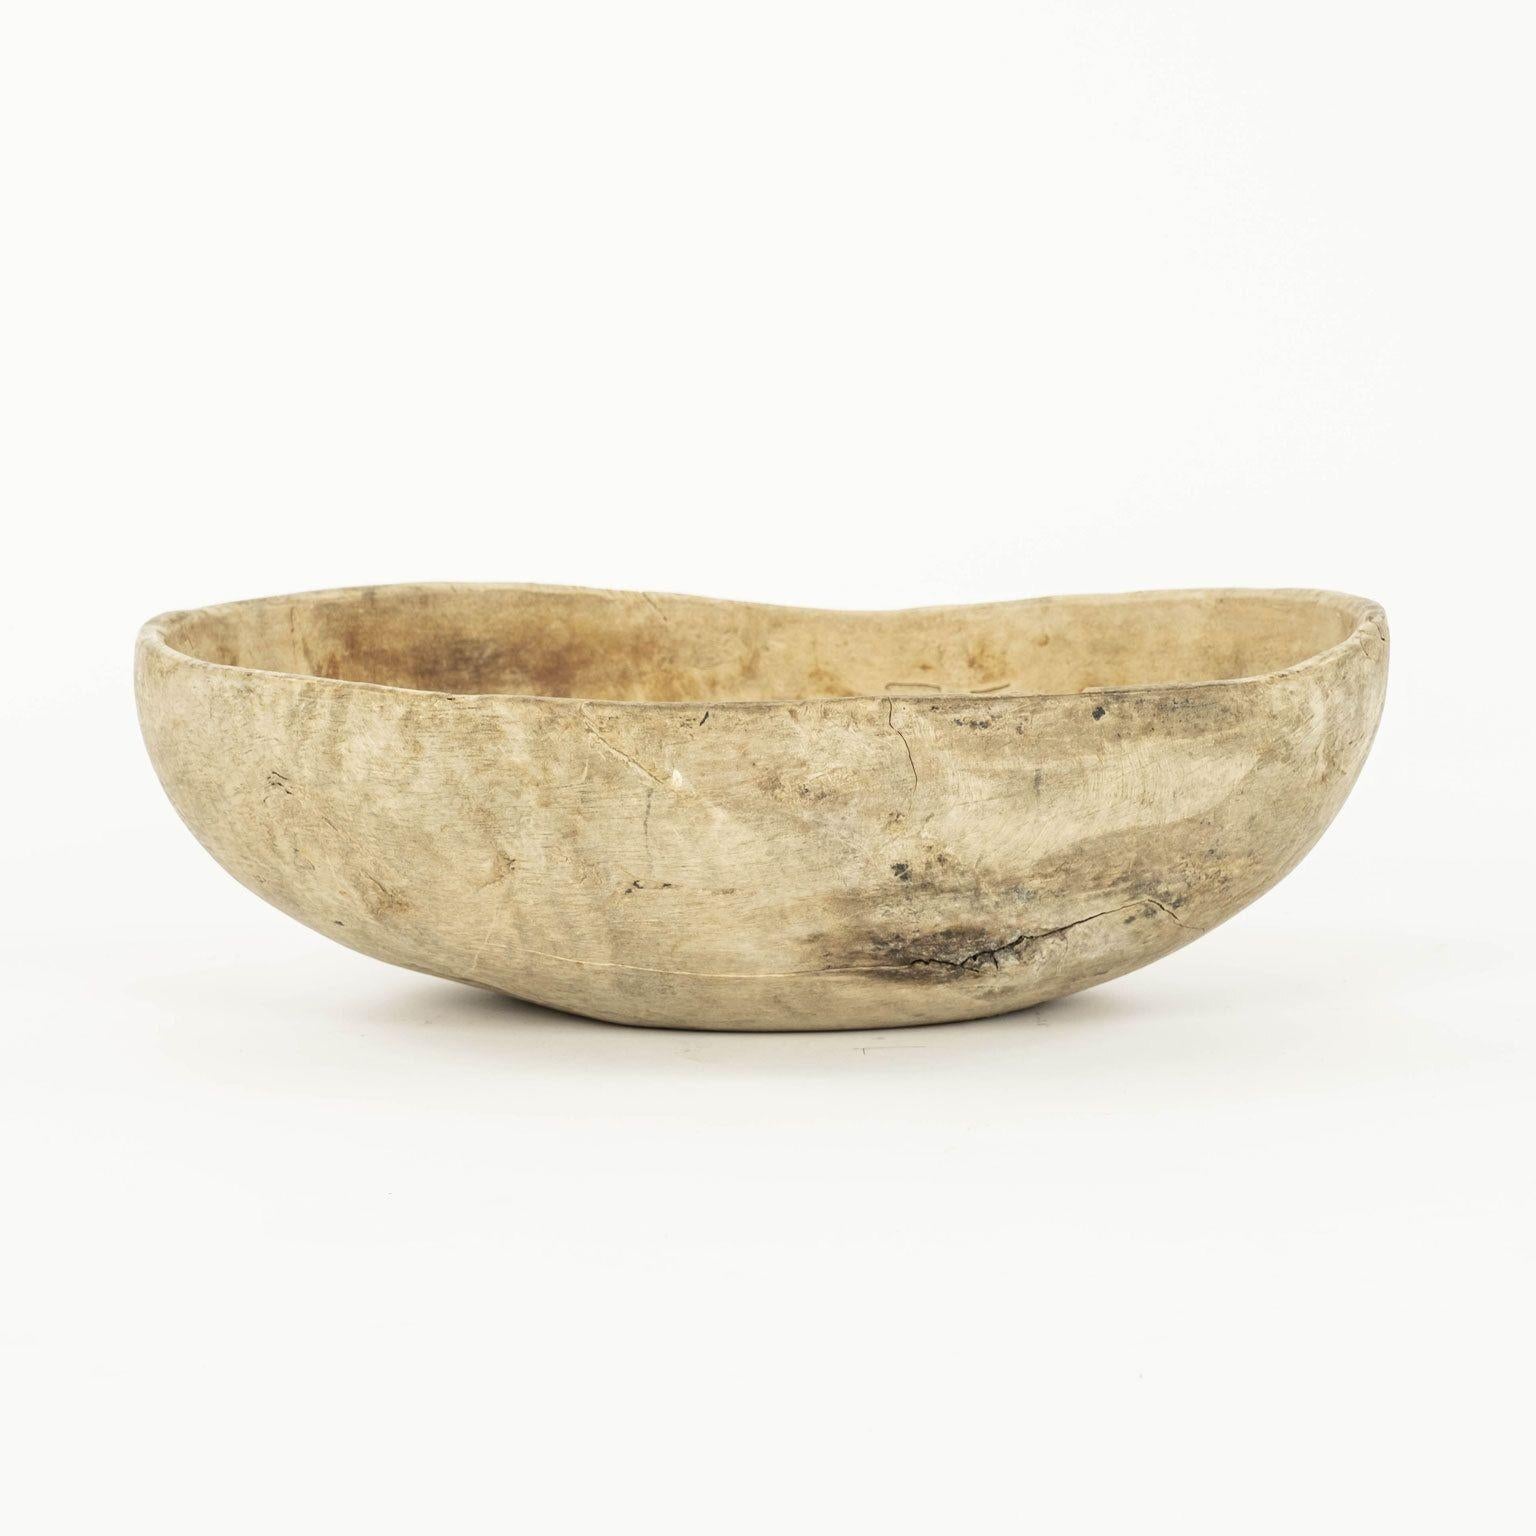 Swedish naturally-bleached root wood bowl: large hand-carved burled oval-like triangular-shape root wood bowl with exquisite patina.